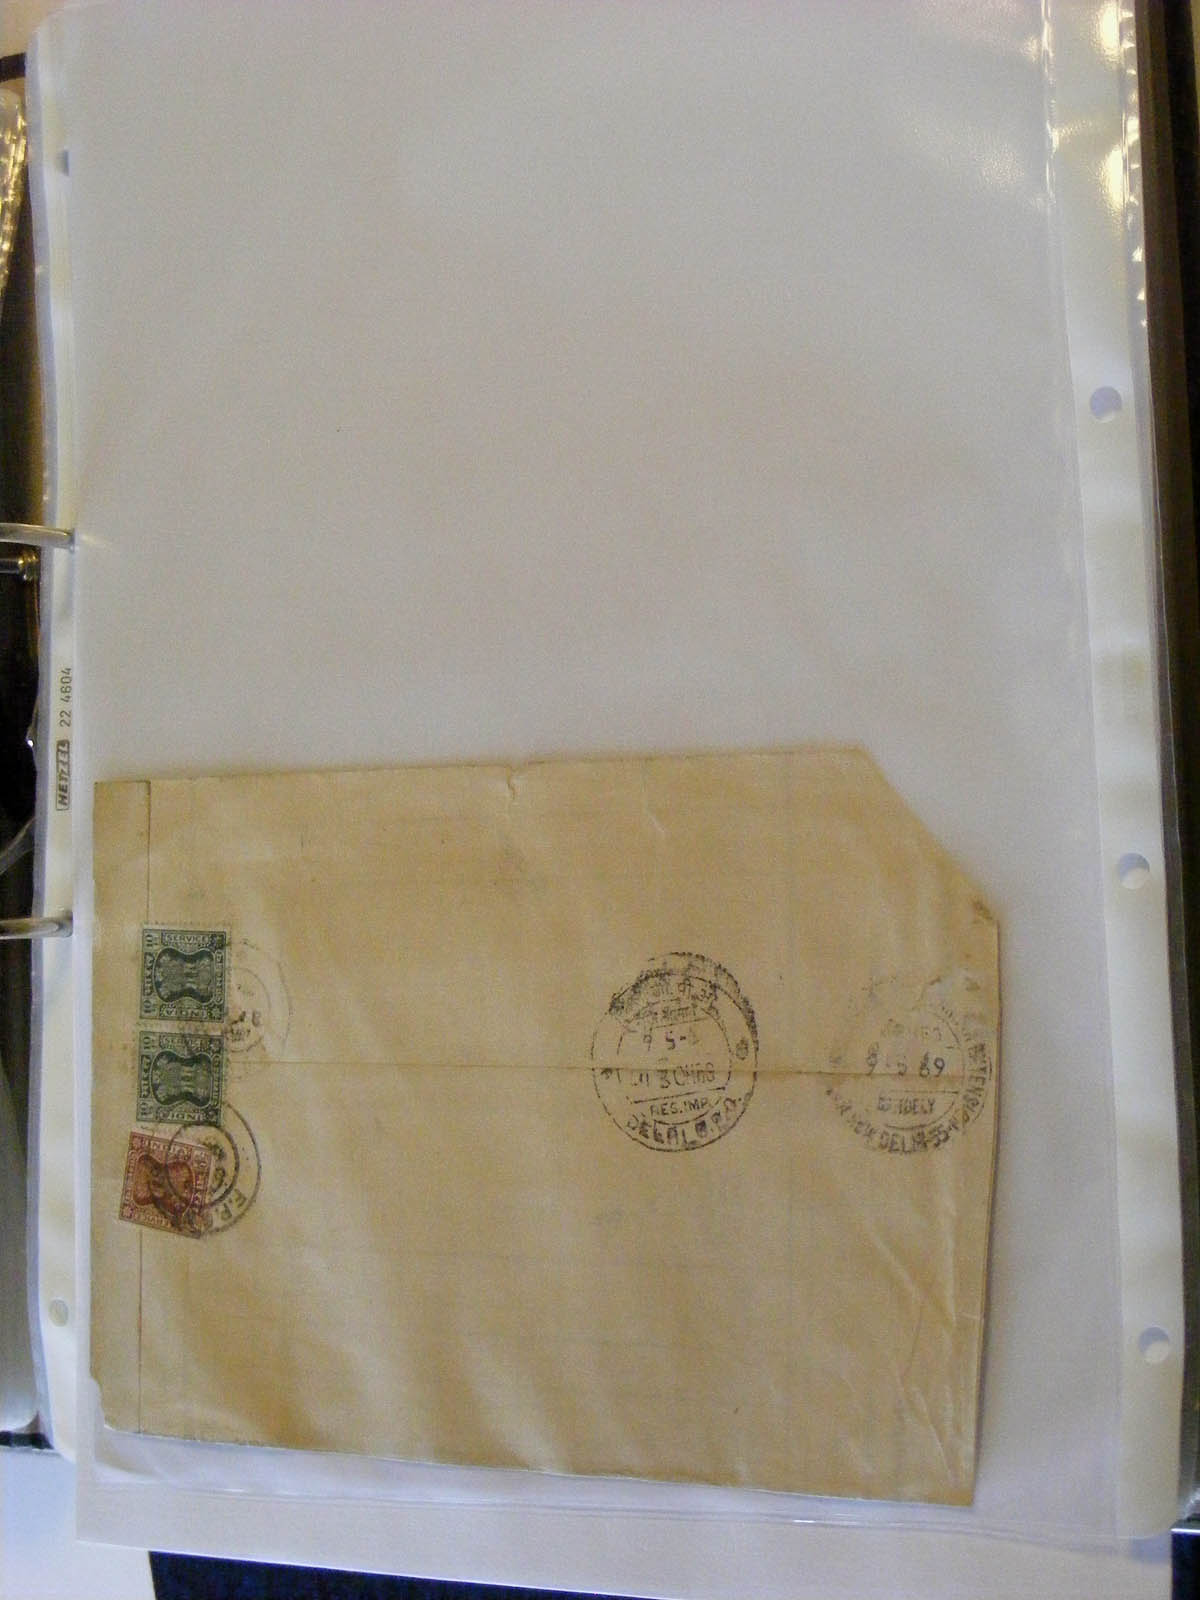 19584-1 094 - 19584 India service covers.